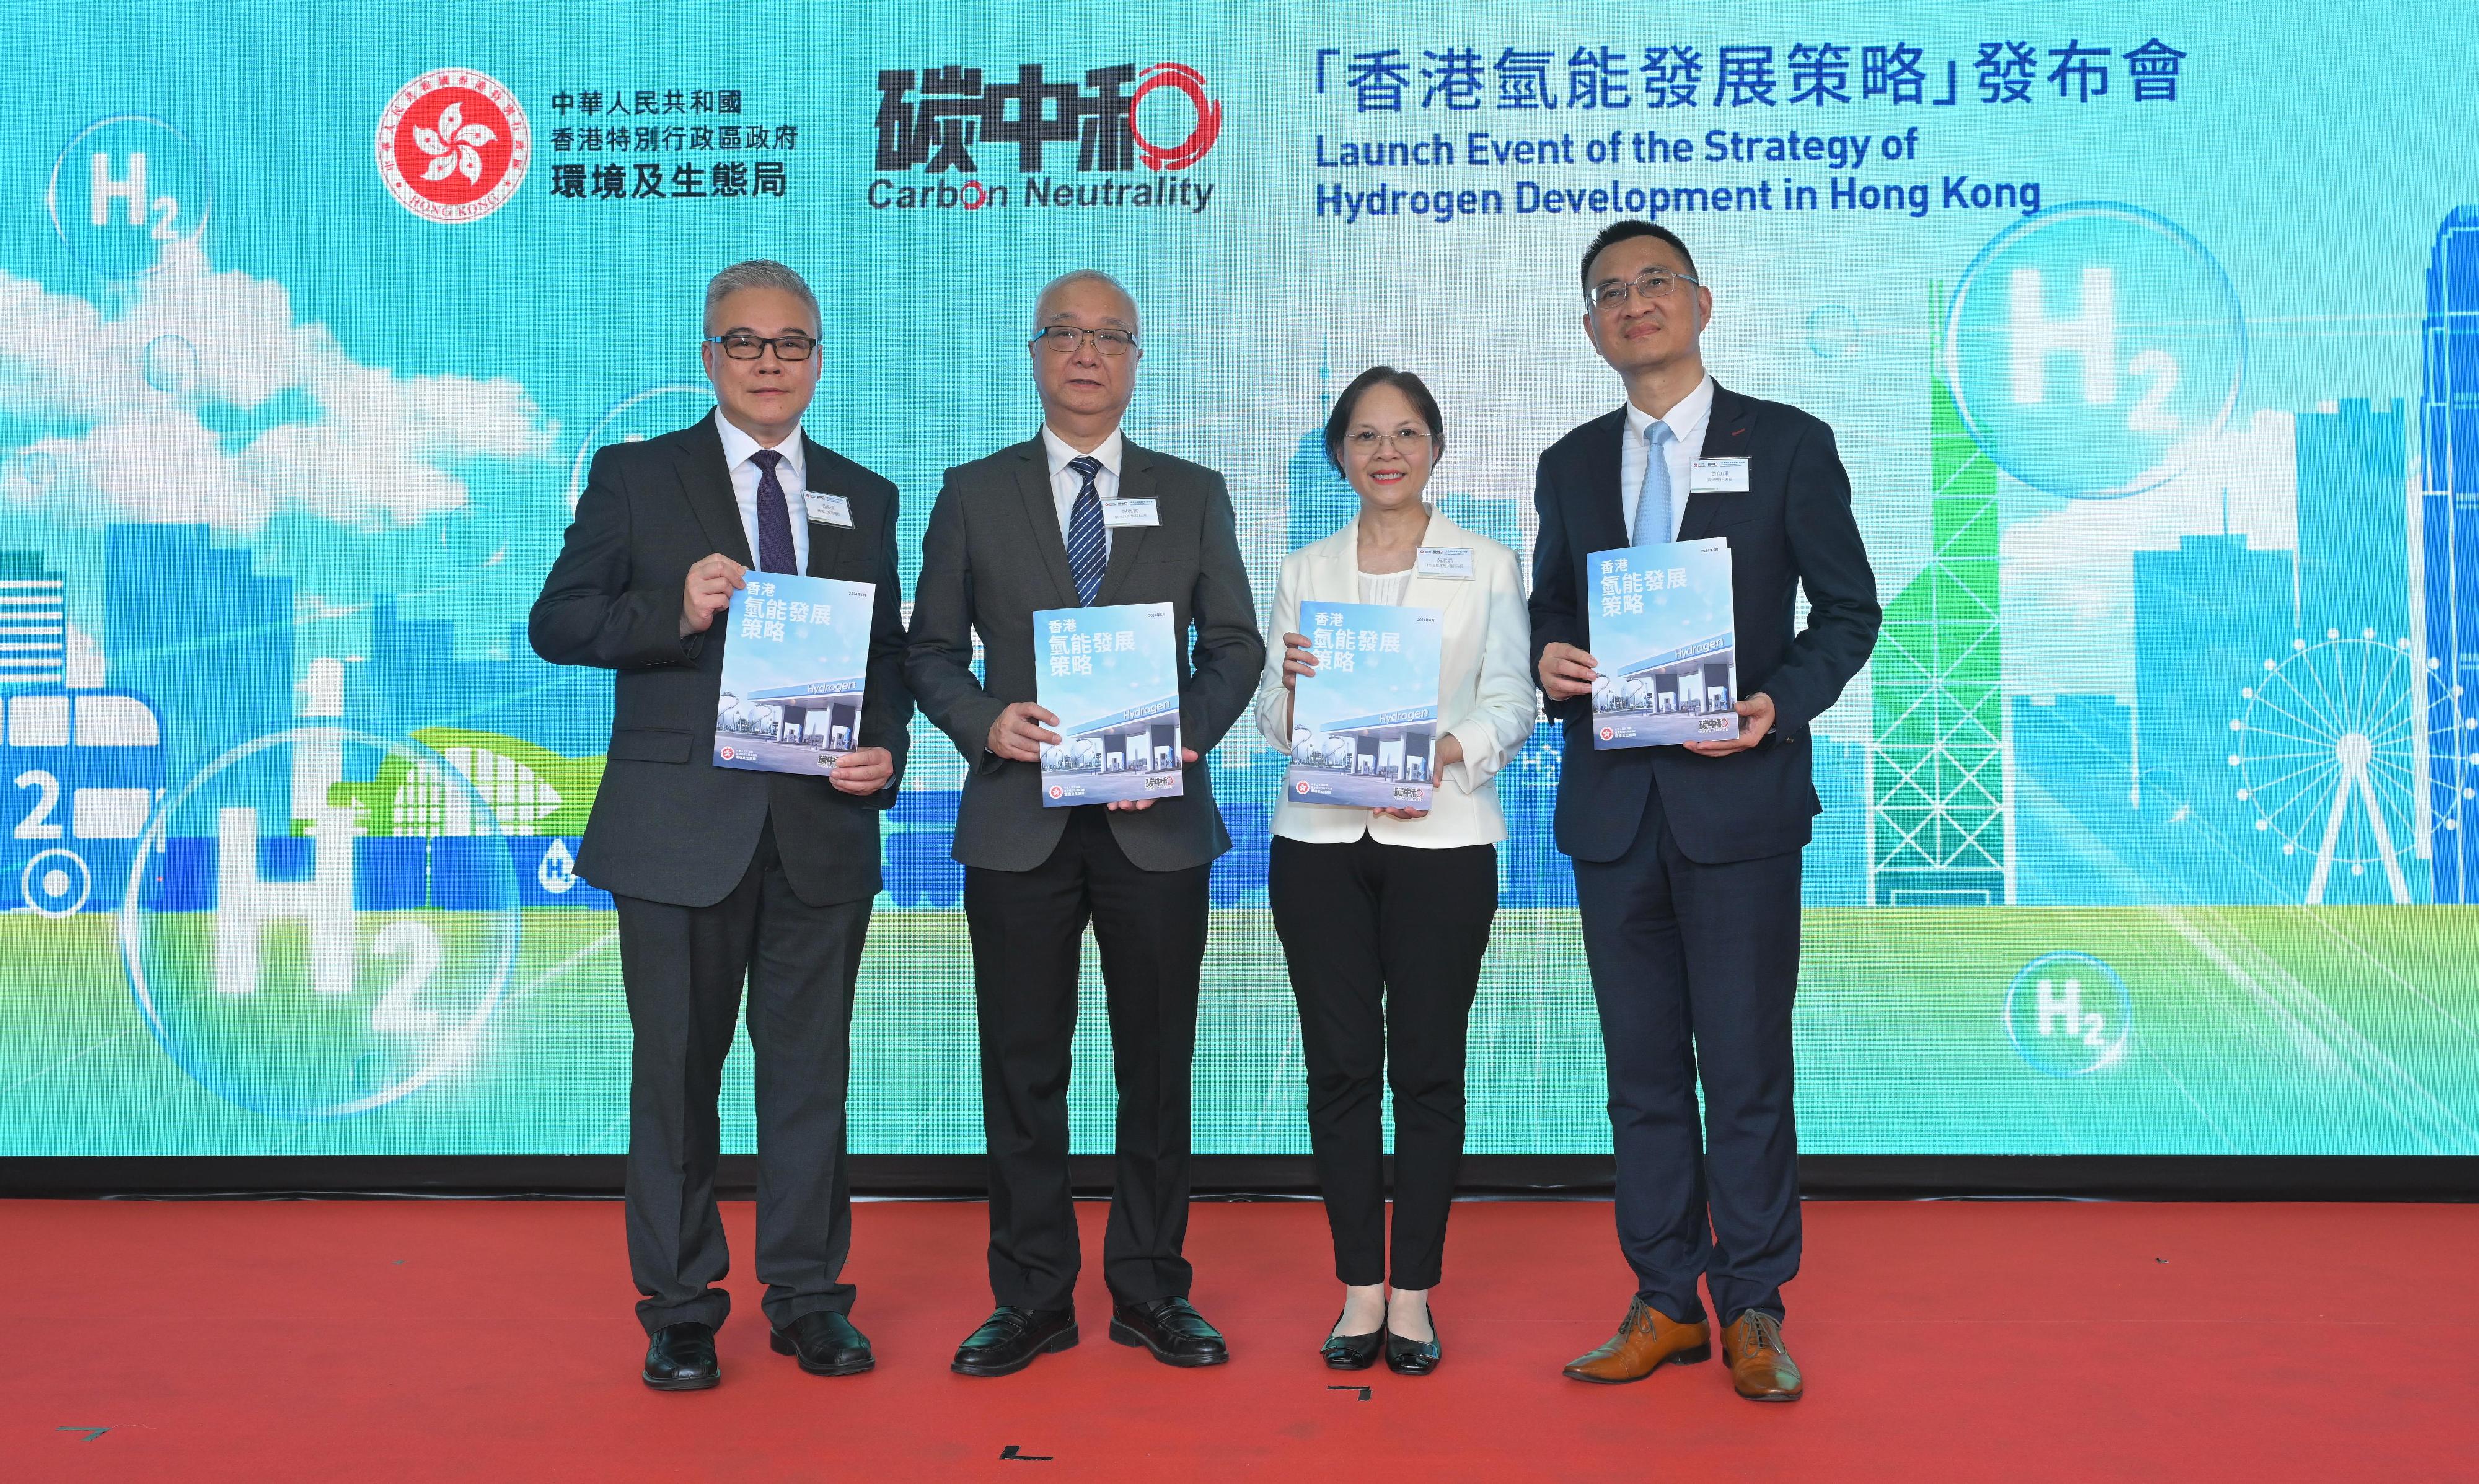 The Government today (June 17) announced the Strategy of Hydrogen Development in Hong Kong. Photo shows the Secretary for Environment and Ecology, Mr Tse Chin-wan (second left); the Under Secretary for Environment and Ecology, Miss Diane Wong (second right); the Commissioner for Climate Change, Mr Wong Chuen-fai (first right); and the Director of Electrical and Mechanical Services, Mr Poon Kwok-ying (first left) at the launch event.